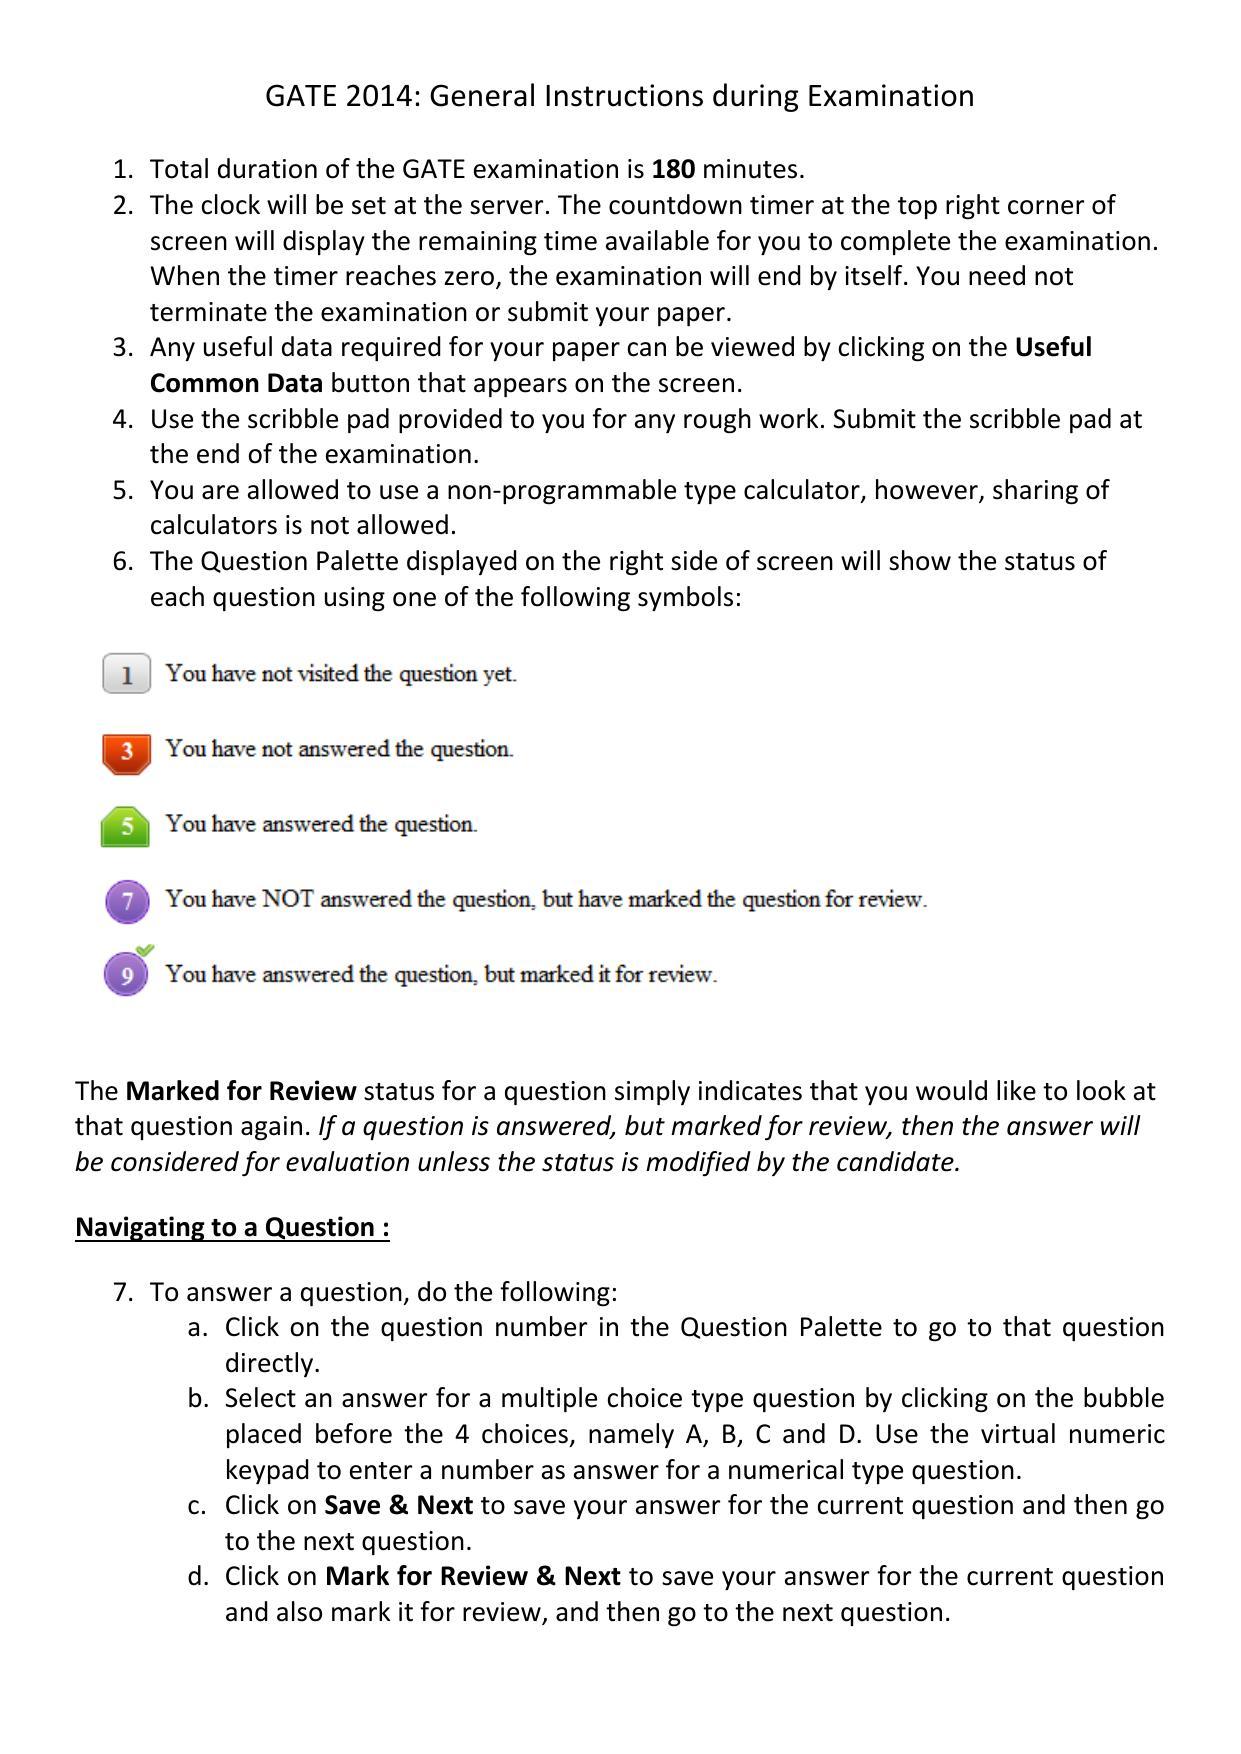 GATE 2014 Biotechnology (BT) Question Paper with Answer Key - Page 1